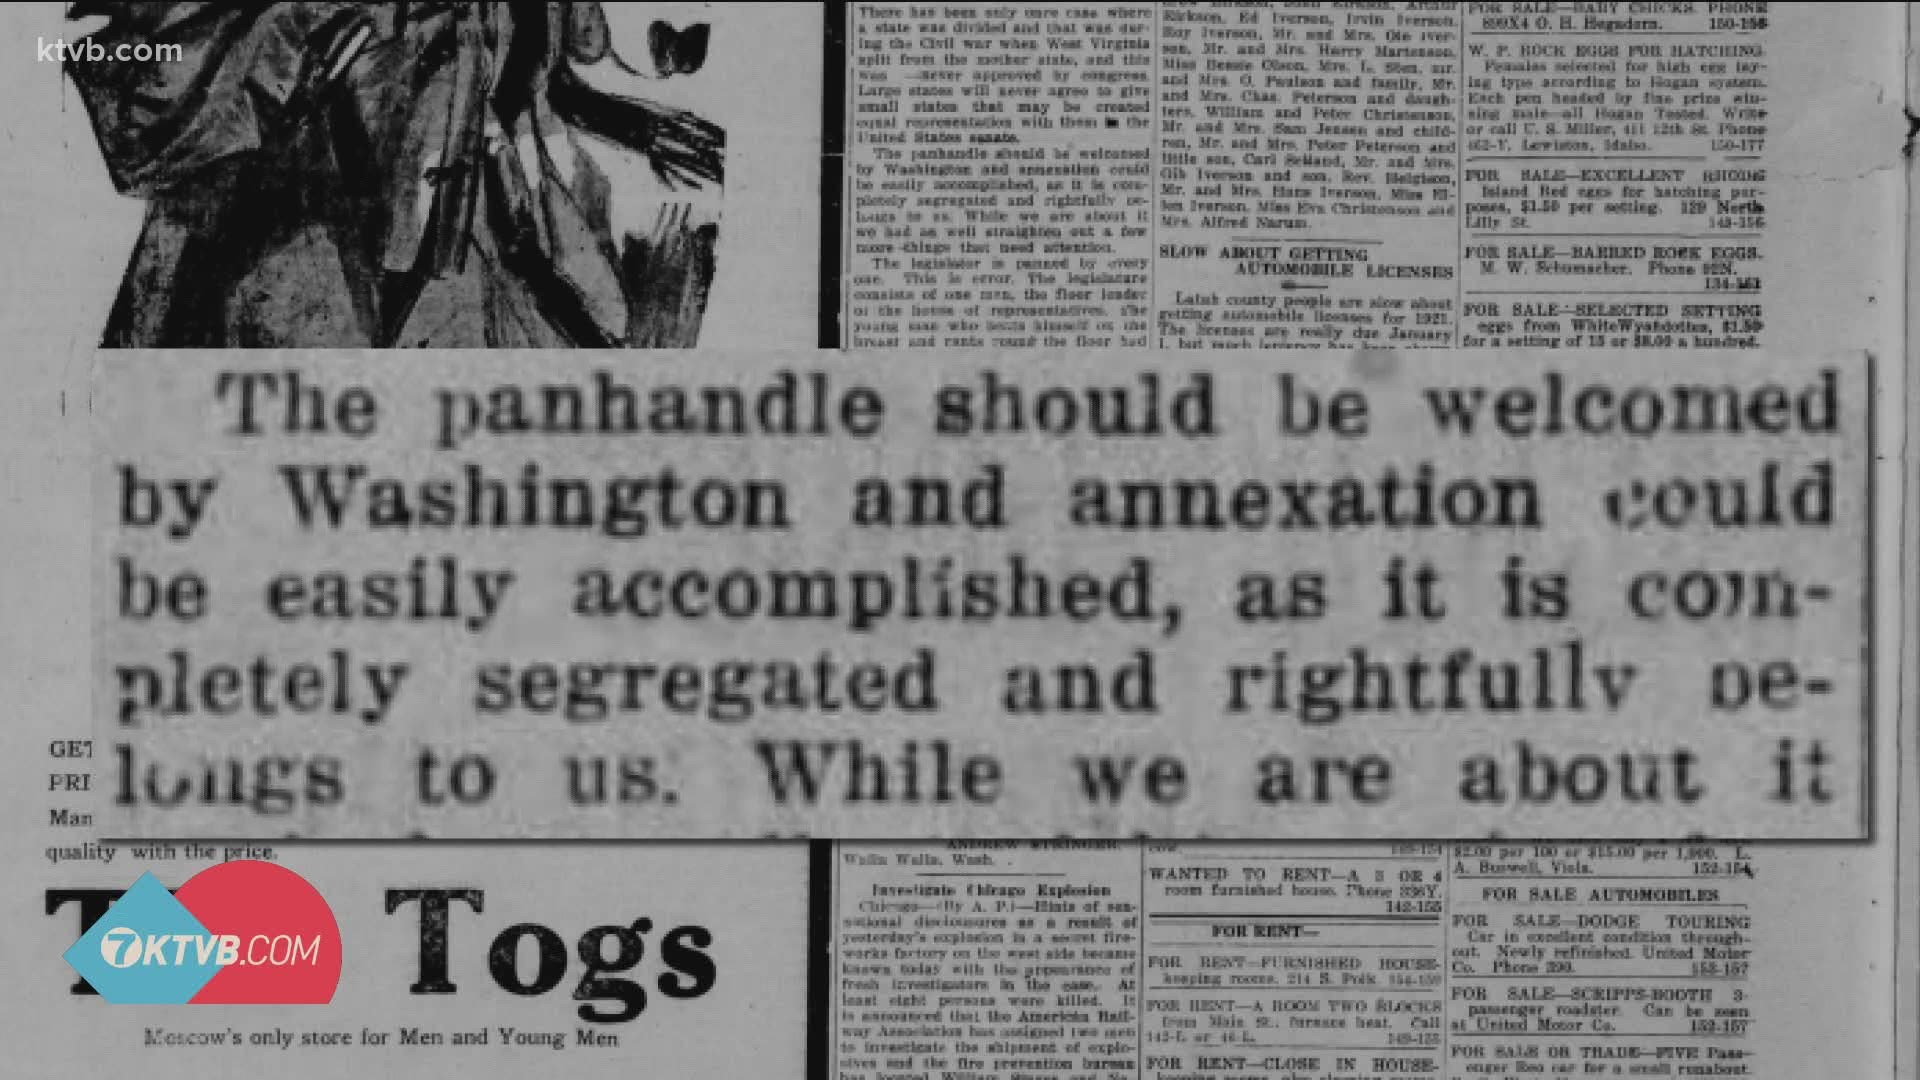 Andrew Stringer of Walla Walla, Wash. penned a letter to the Spokesman-Review on March 30, 1921. He argued that Idaho's Panhandle should become part of Washington.